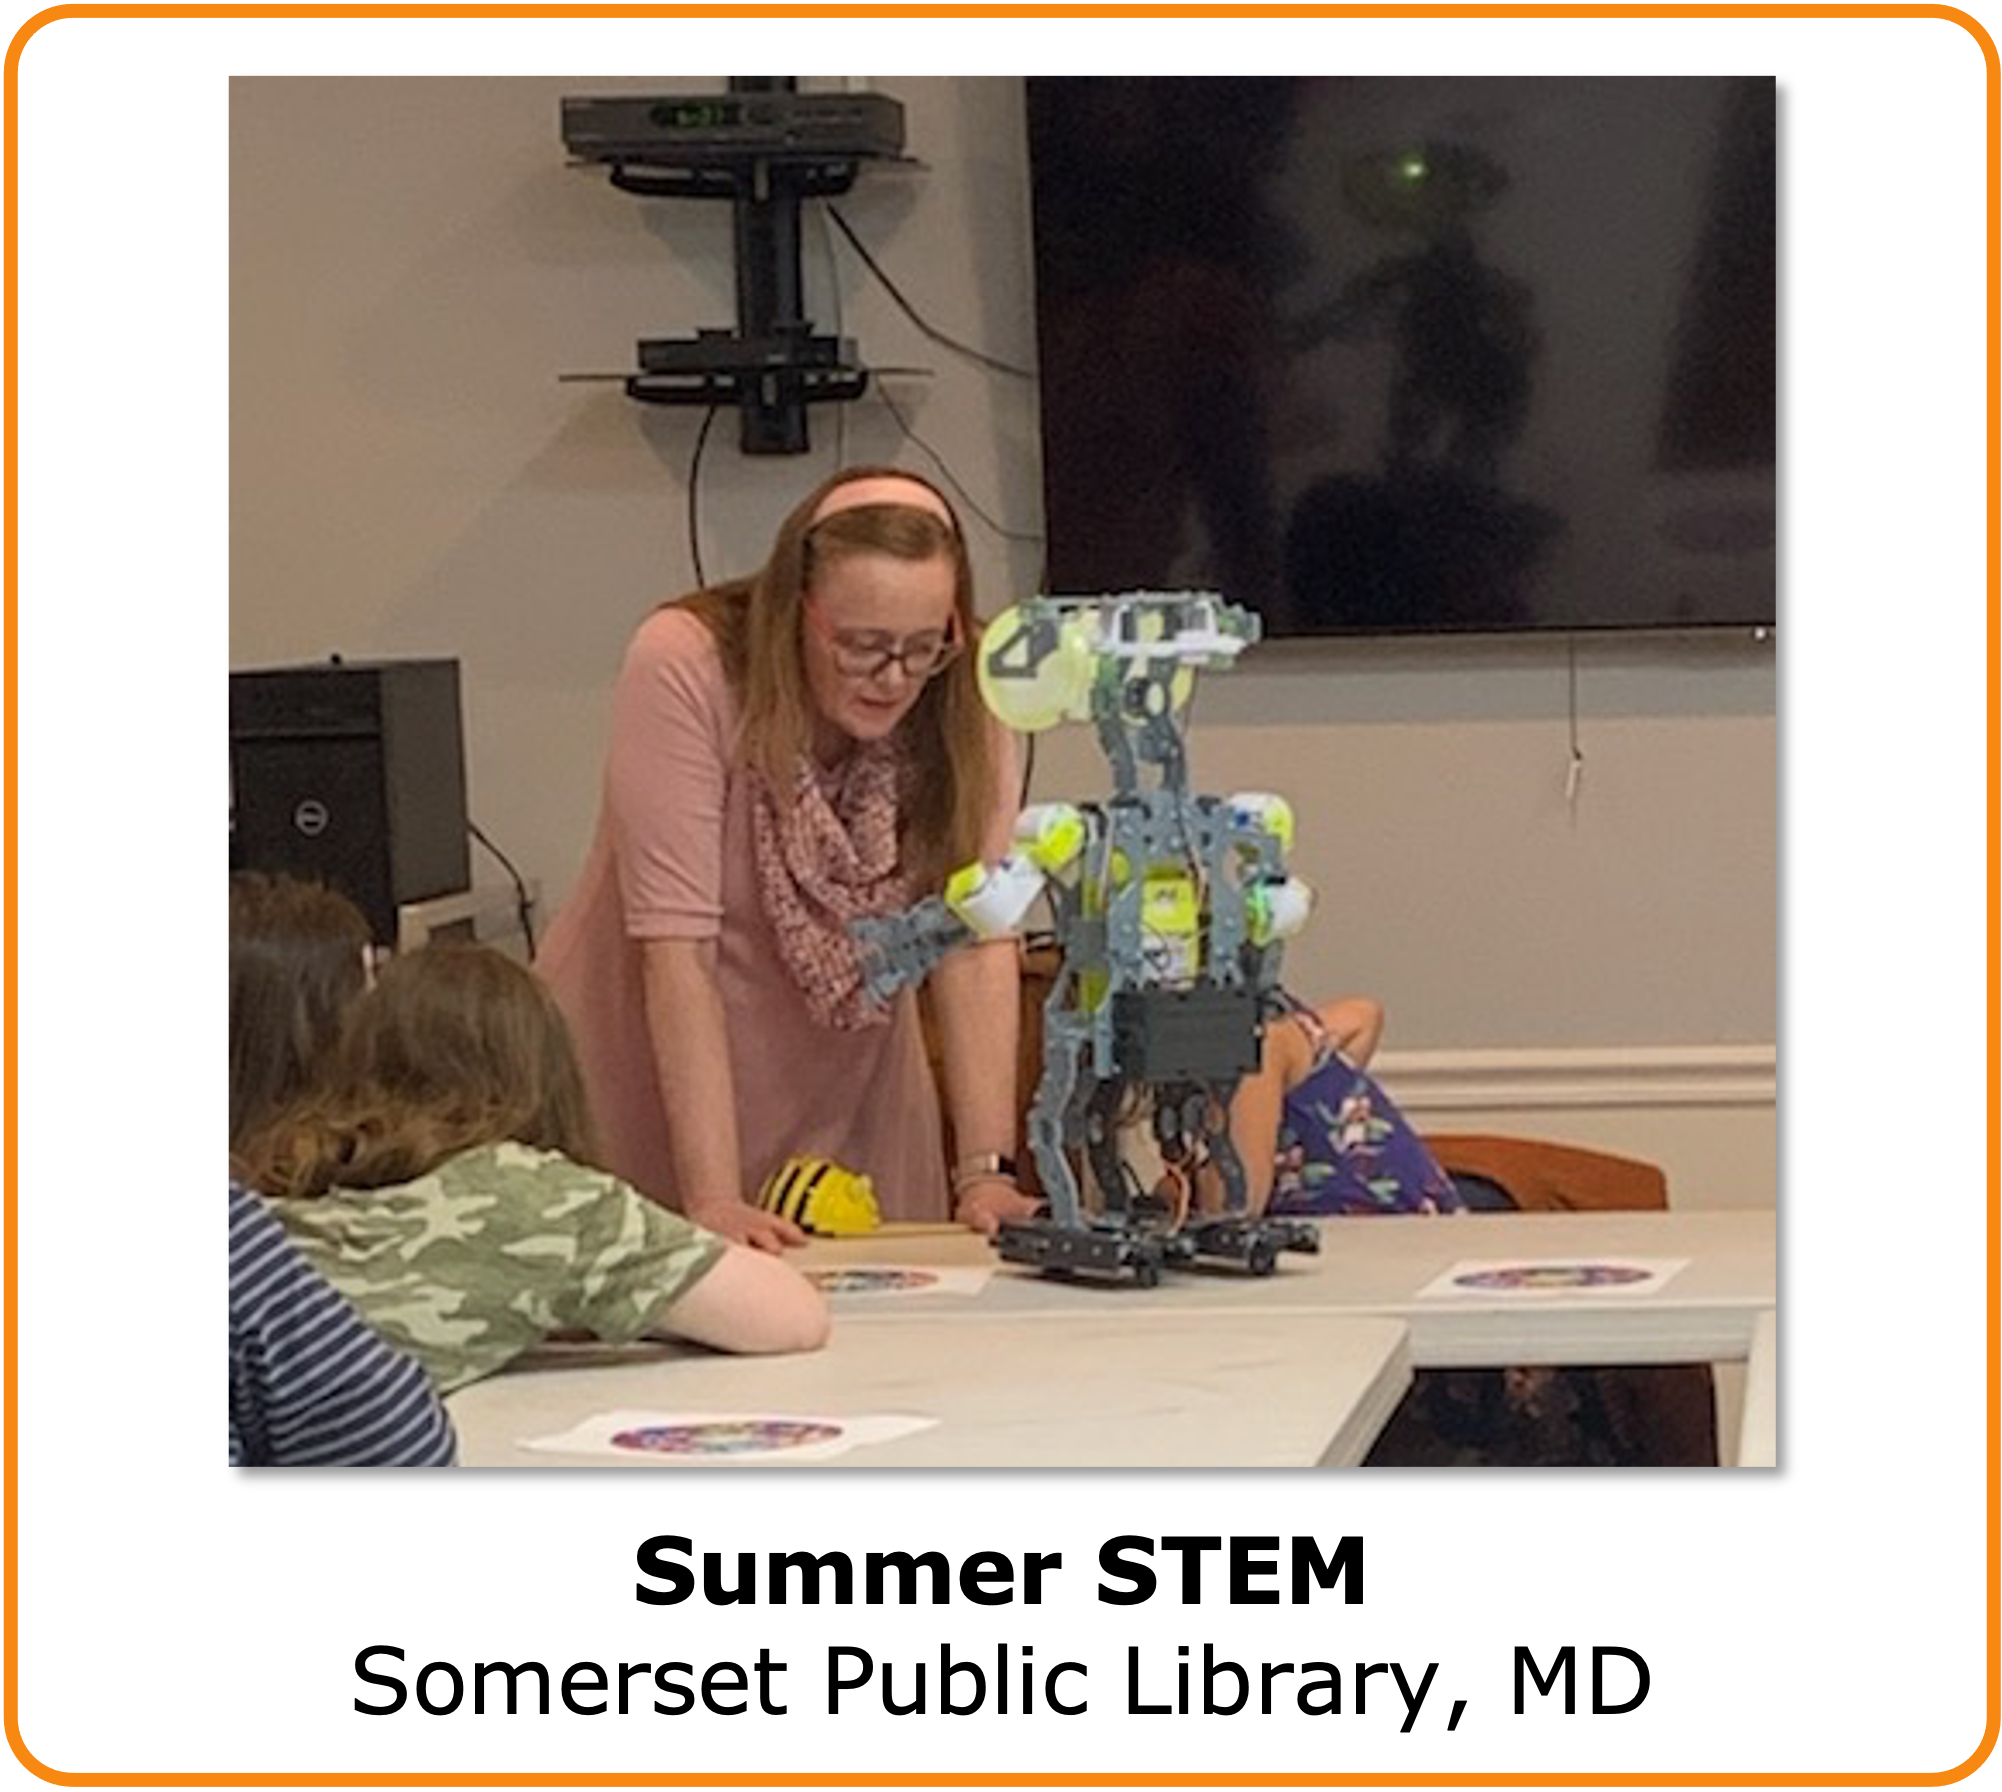 Click to open the case study of the summer STEM program at the Somerset Public Library in Maryland.